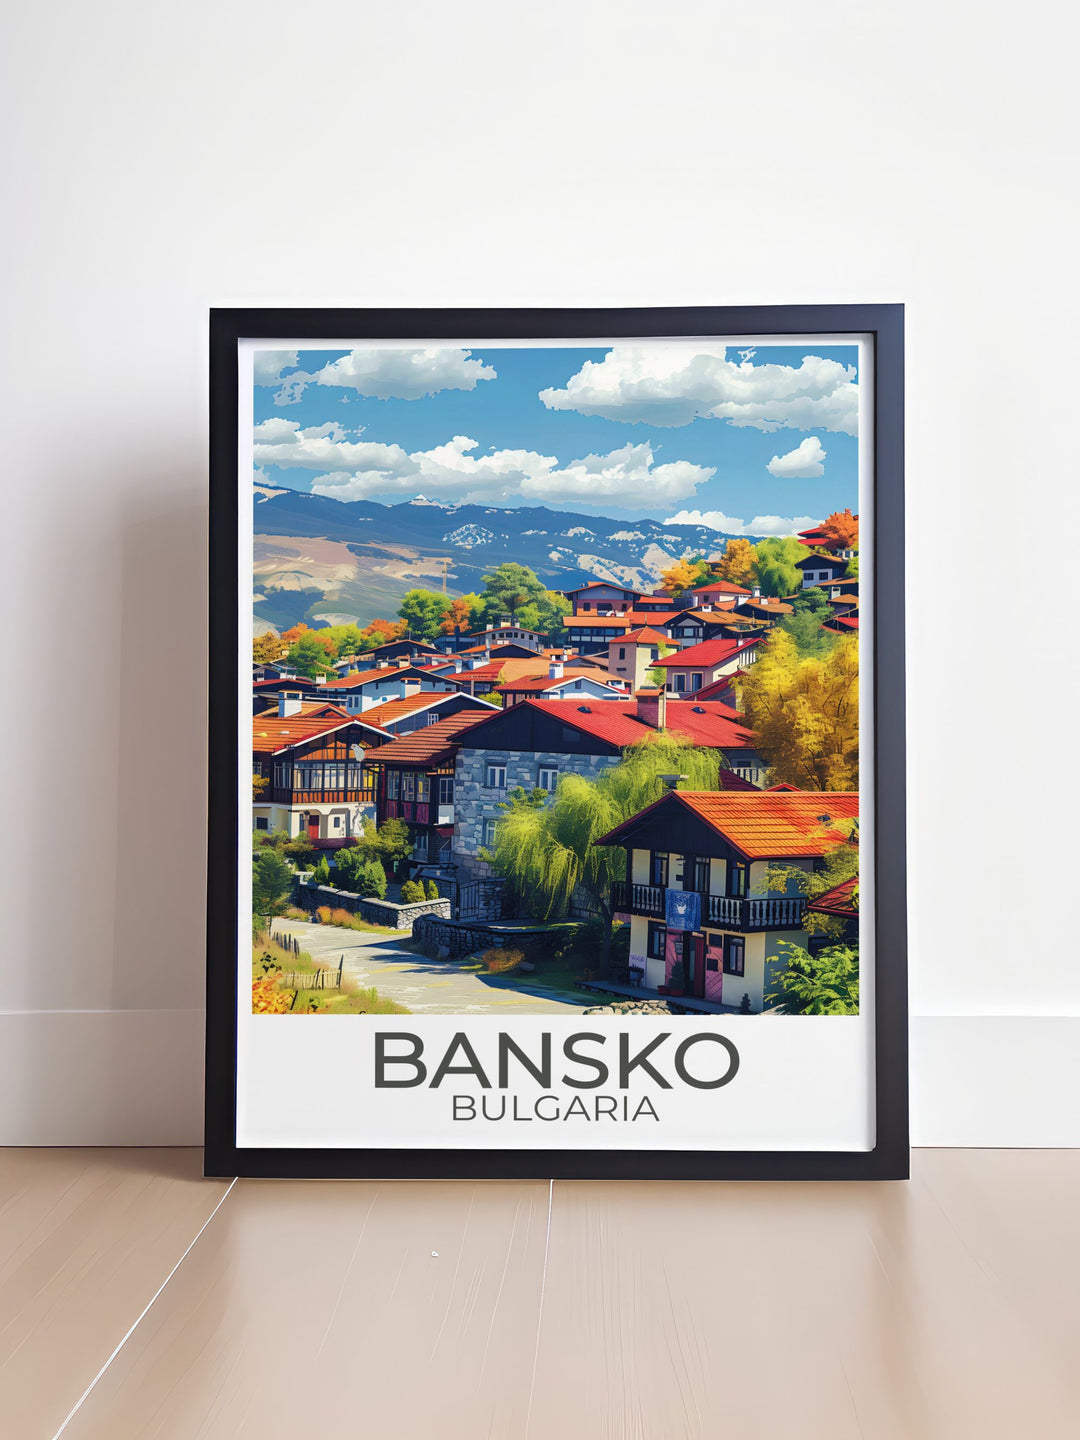 This art print captures the excitement of Bansko Ski Resort, showcasing its modern facilities and scenic alpine backdrop, perfect for adding a touch of winter sports adventure to your home decor.